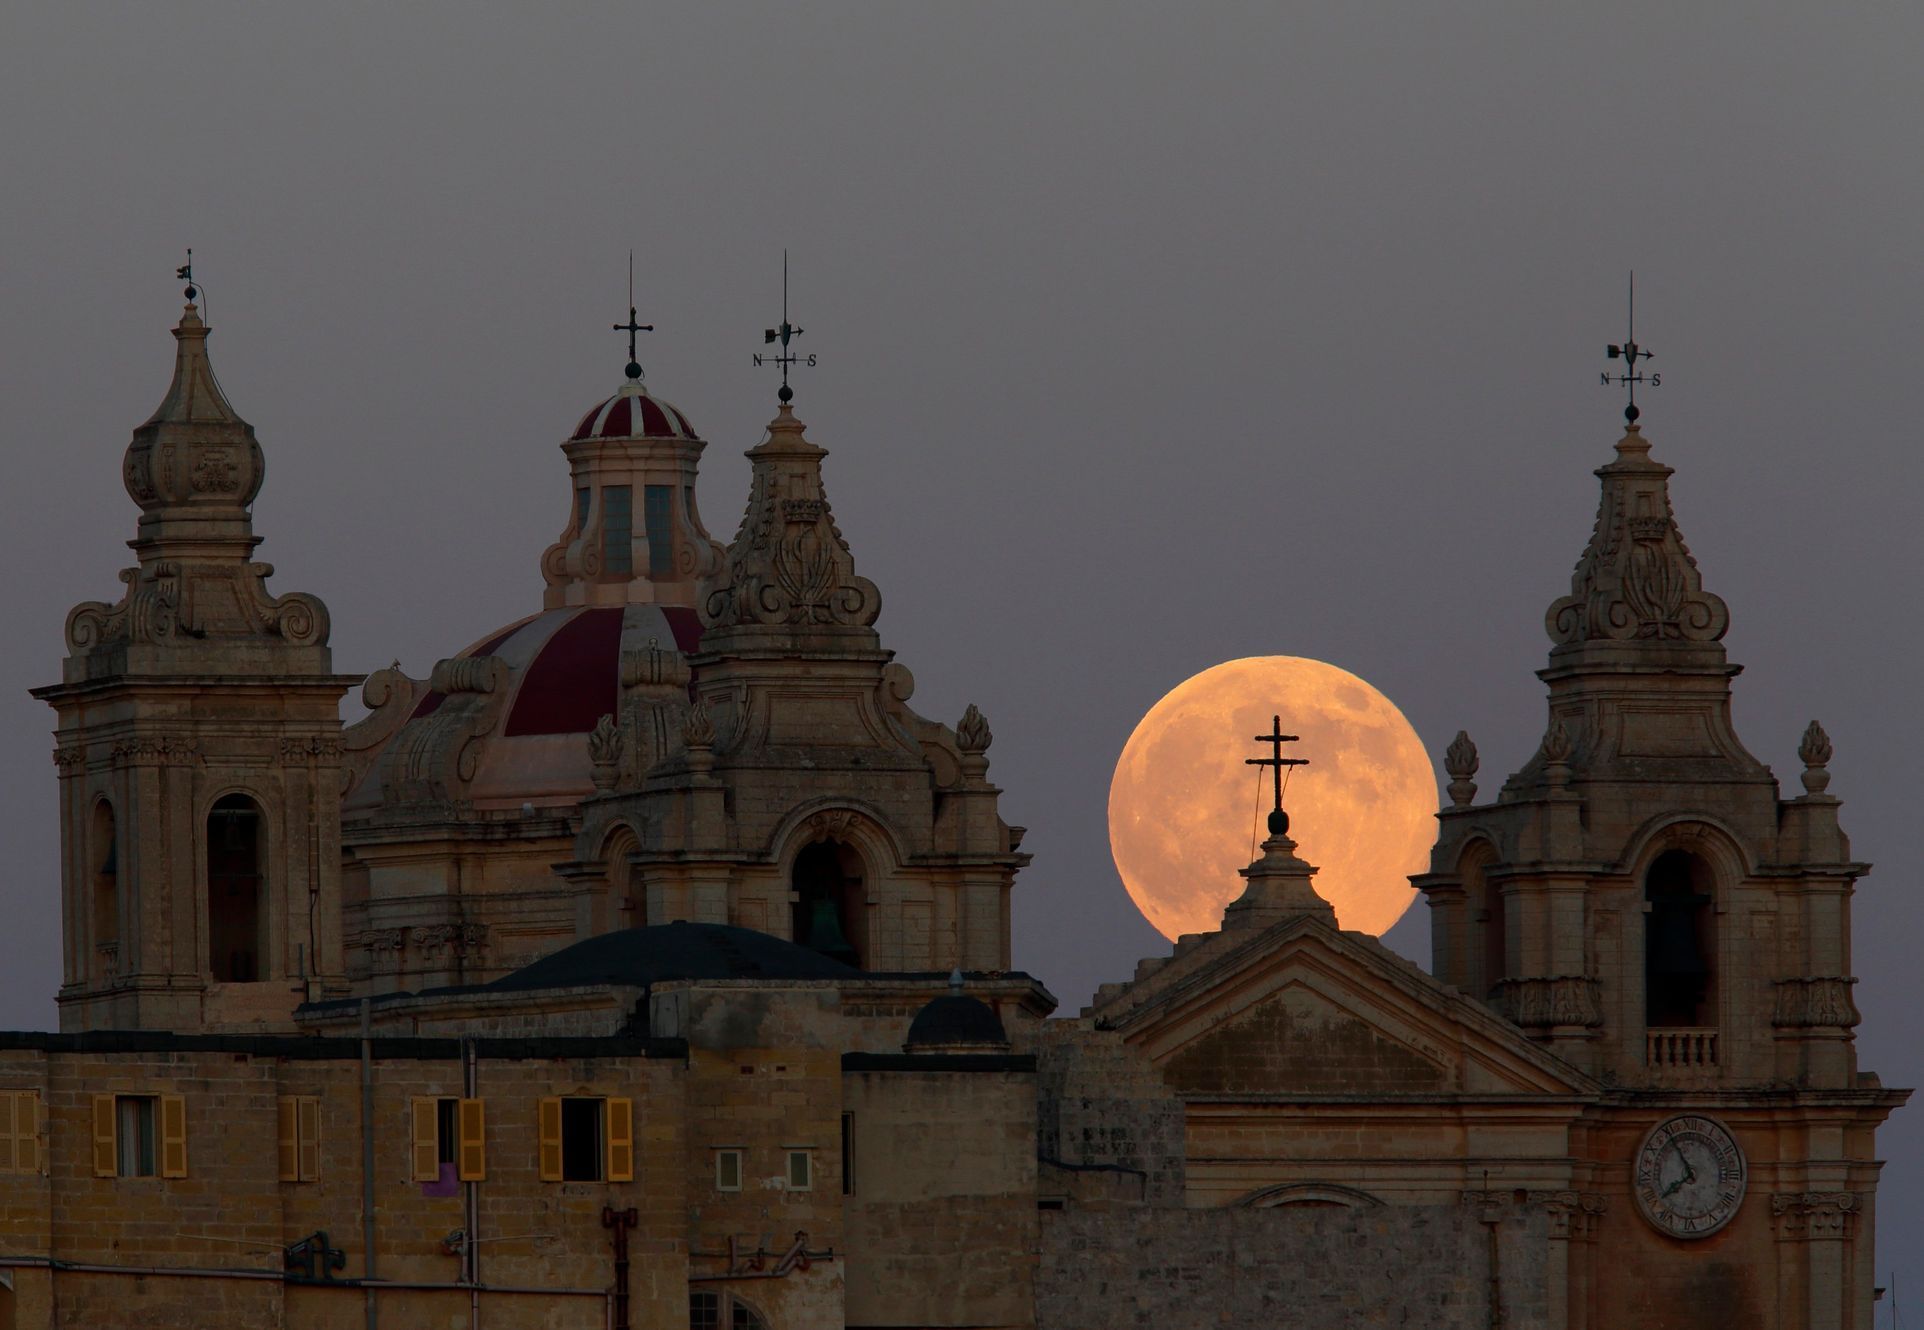 Supermoon rises behind the cathedral in Mdina, Malta's ancient capital city